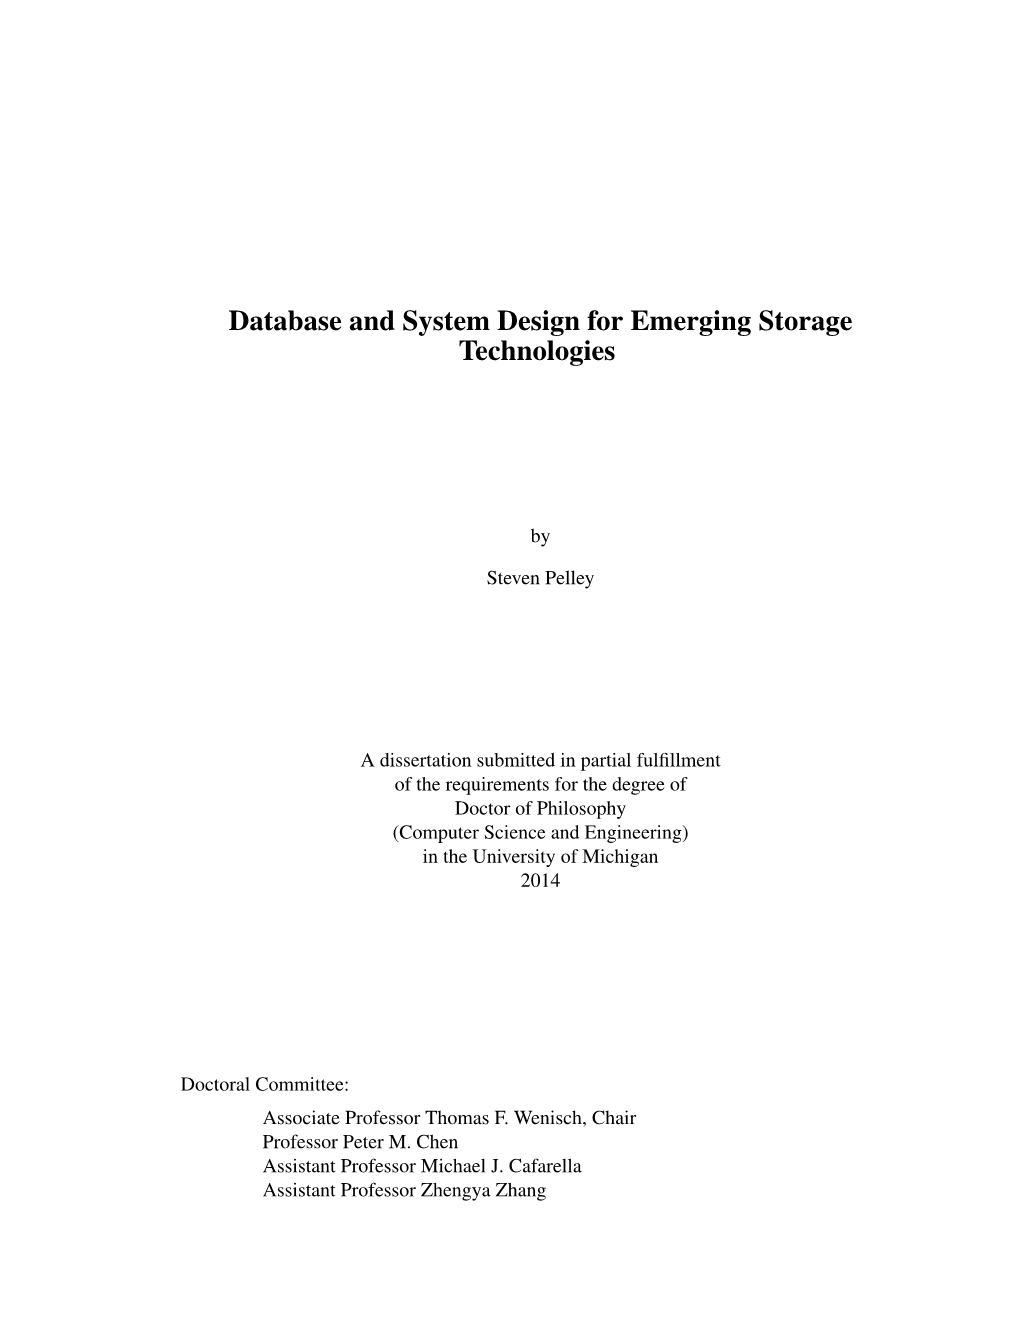 Database and System Design for Emerging Storage Technologies